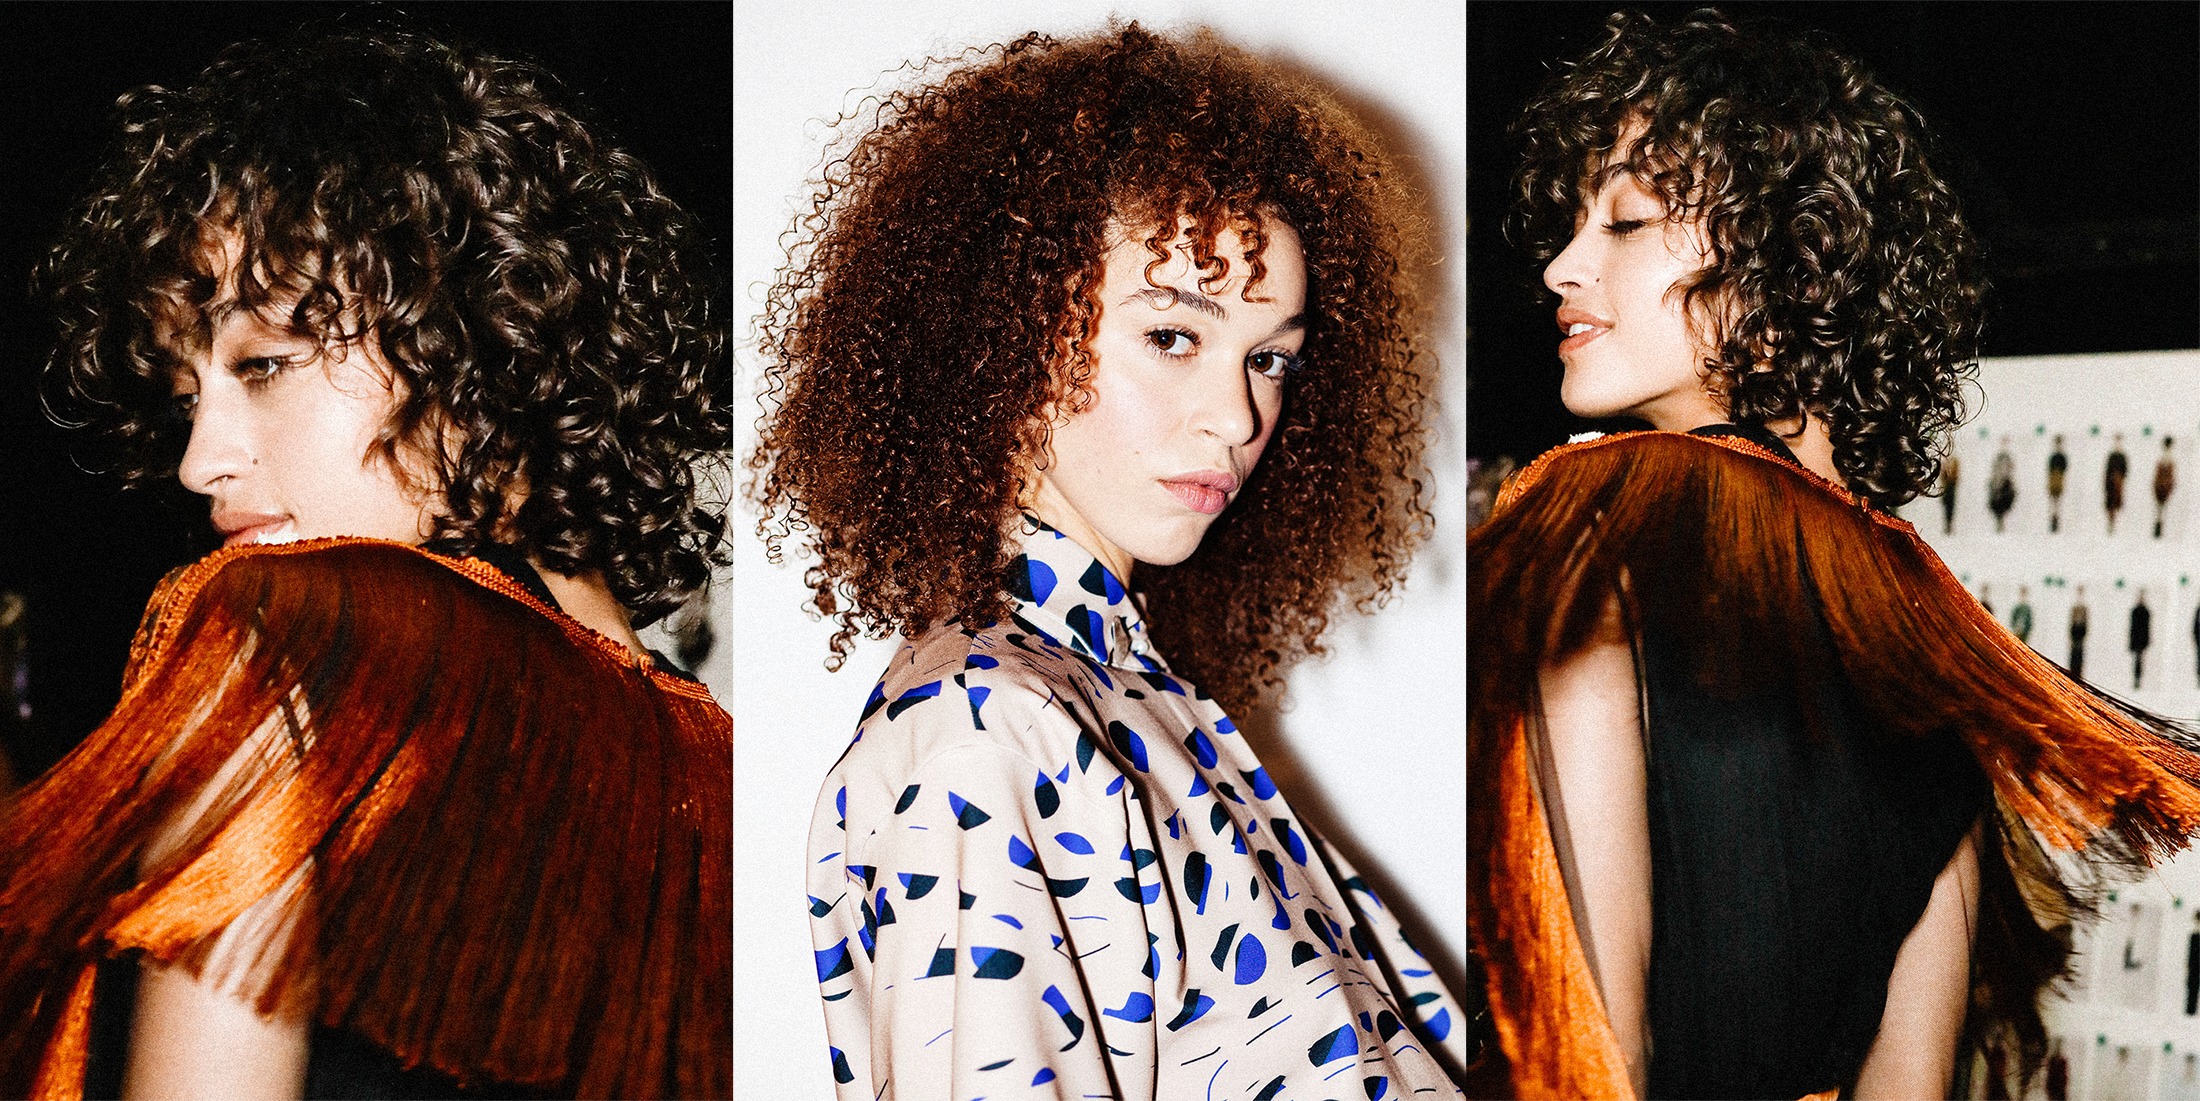 5 Brushes For Curly Hair You Can't Live Without – Pattern Beauty